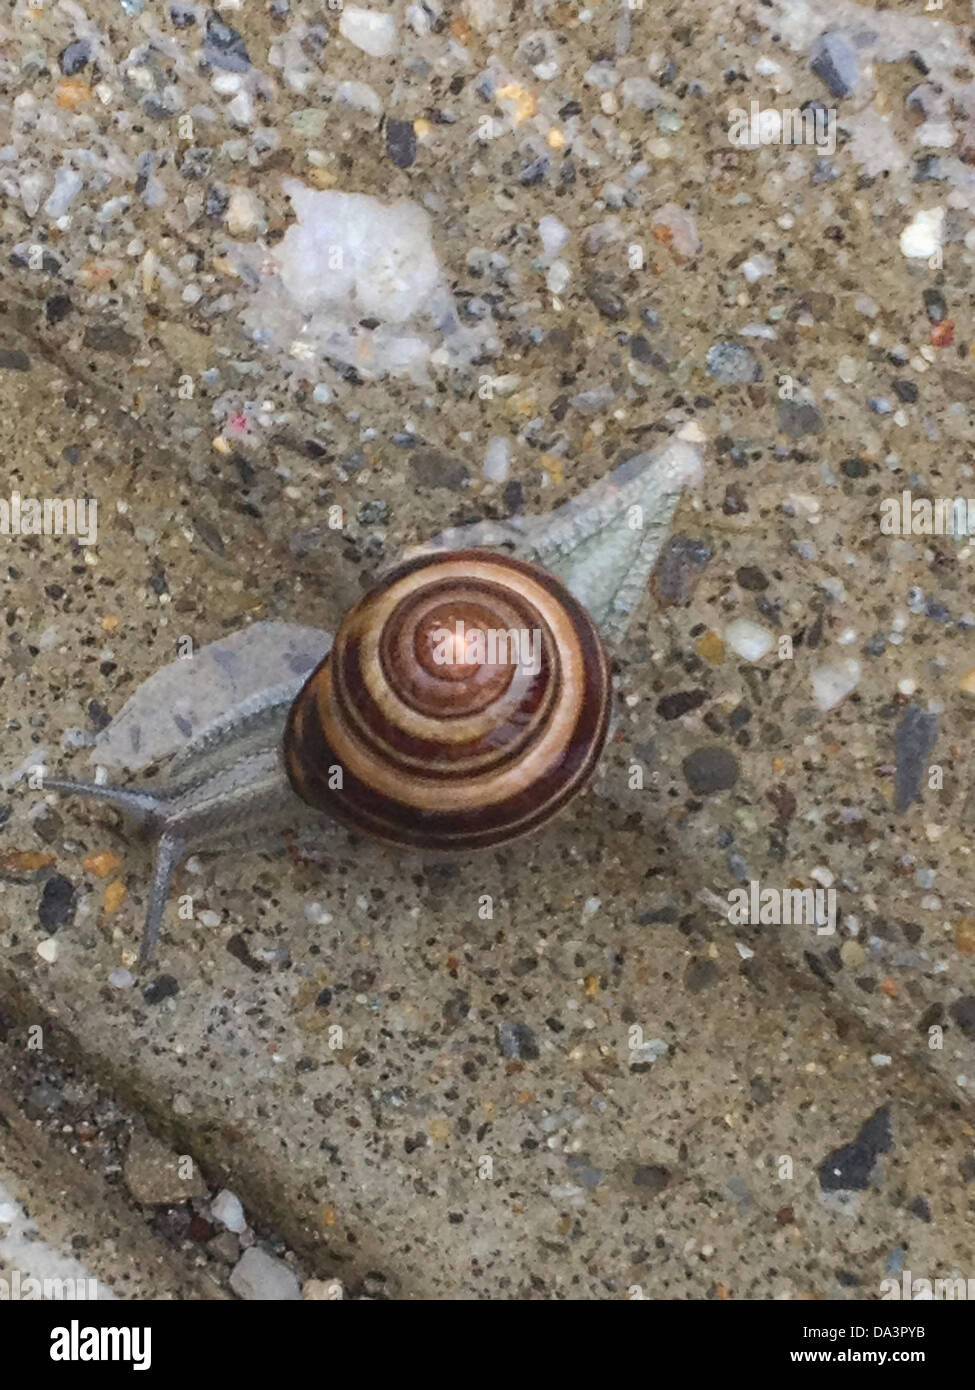 New York, USA. 2nd July 2013. 2 July 2013: With continued rainy weather in the forcast, torrential downpours and flash flood warnings in the New York tristate area, it is the perfect weather for snails.  Here, showing up on a suburban sidewalk in Mt. Kisco, New York. Cepaea nemoralis common names Brown-lipped snail, Larger banded snail, Banded wood snail, Grove snail. iPhone photo. Credit:  Marianne A. Campolongo/Alamy Live News Stock Photo